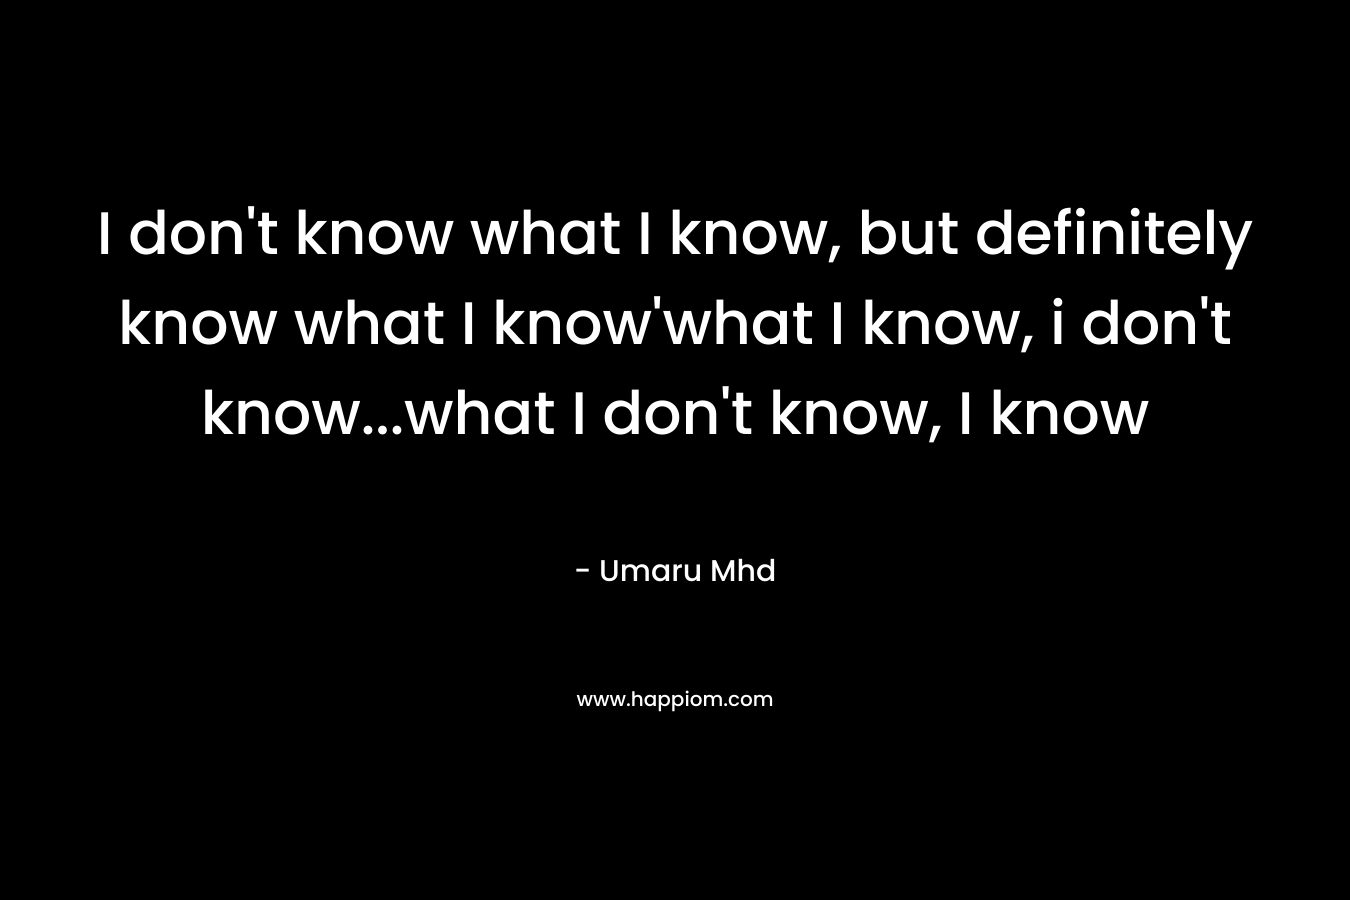 I don't know what I know, but definitely know what I know'what I know, i don't know...what I don't know, I know